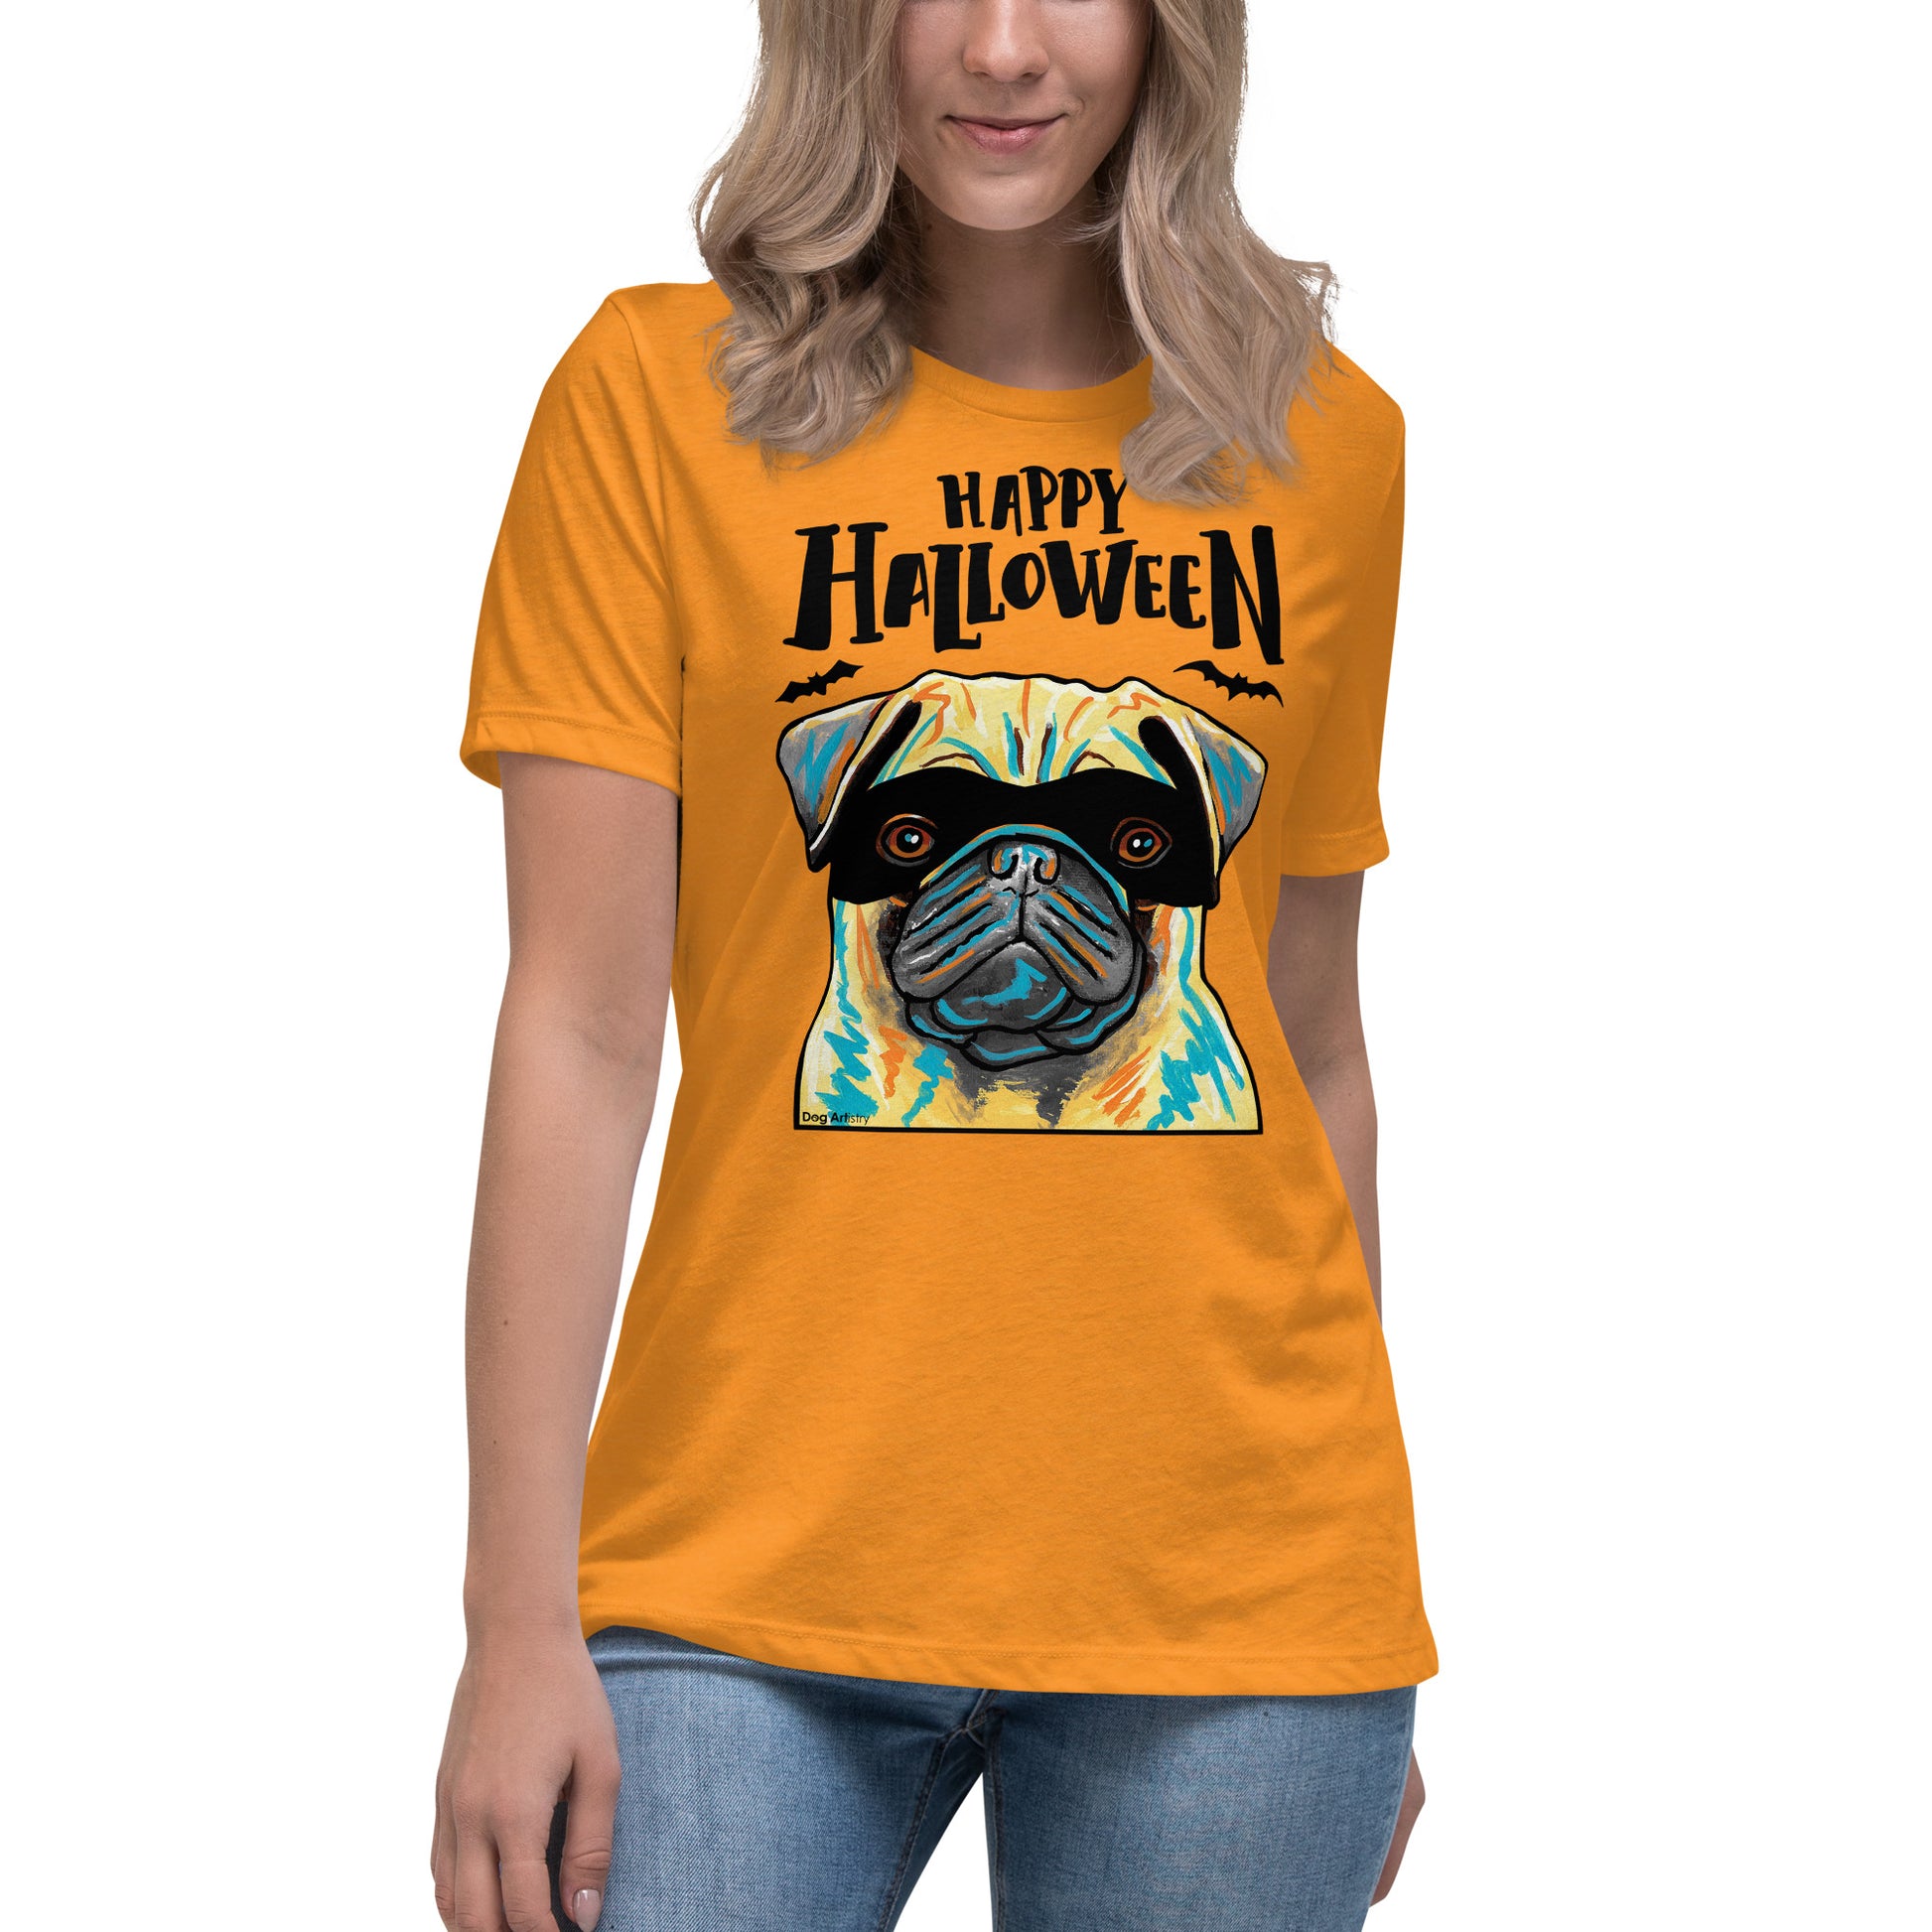 Funny Happy Halloween Pug wearing mask women’s marmalade t-shirt by Dog Artistry.